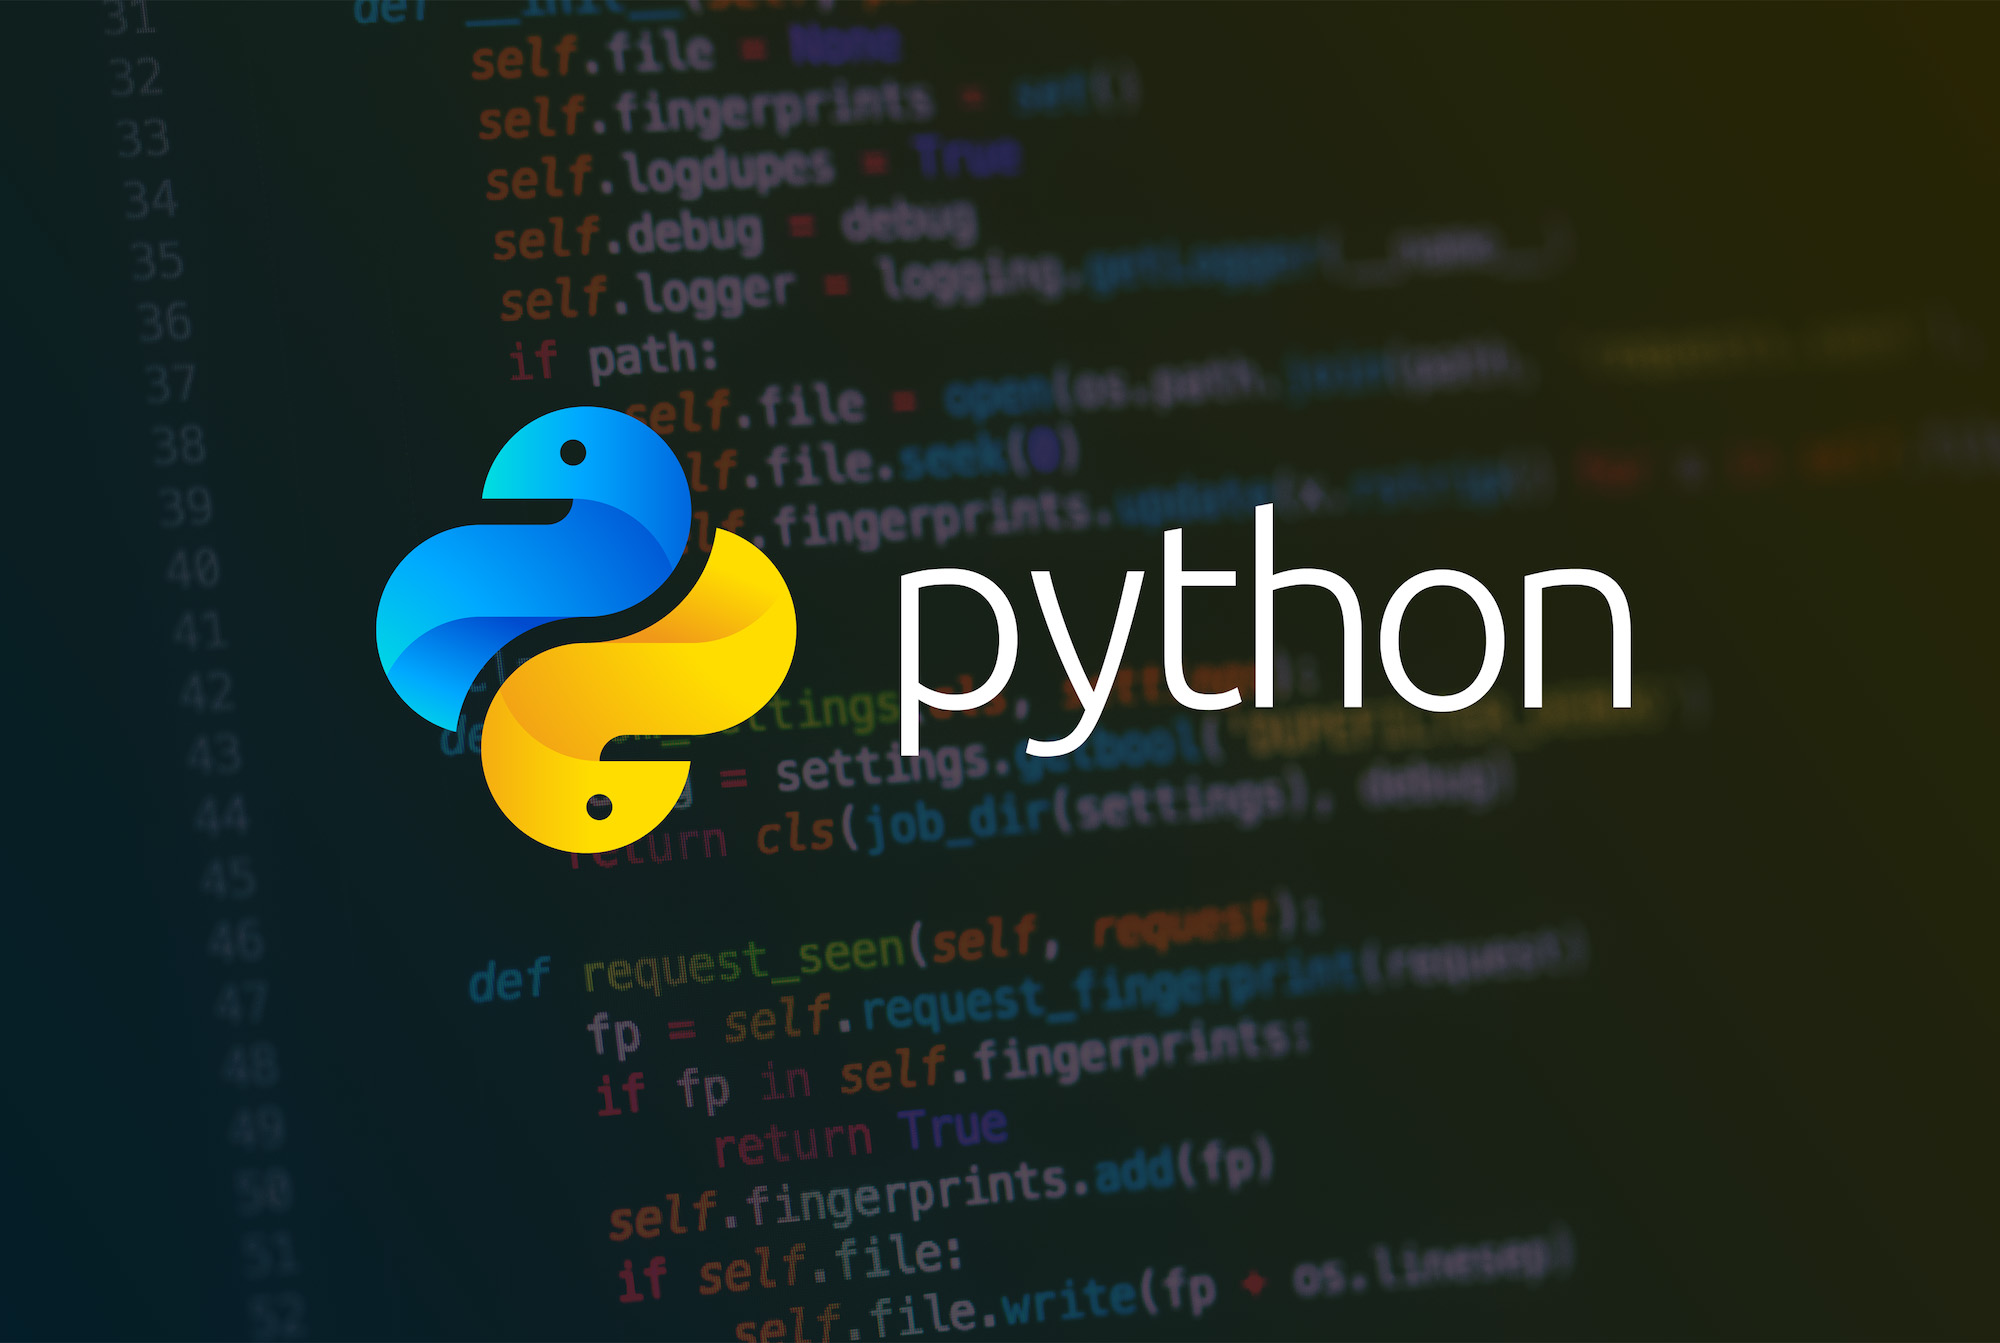 Python: how to get the pronunciation of a word